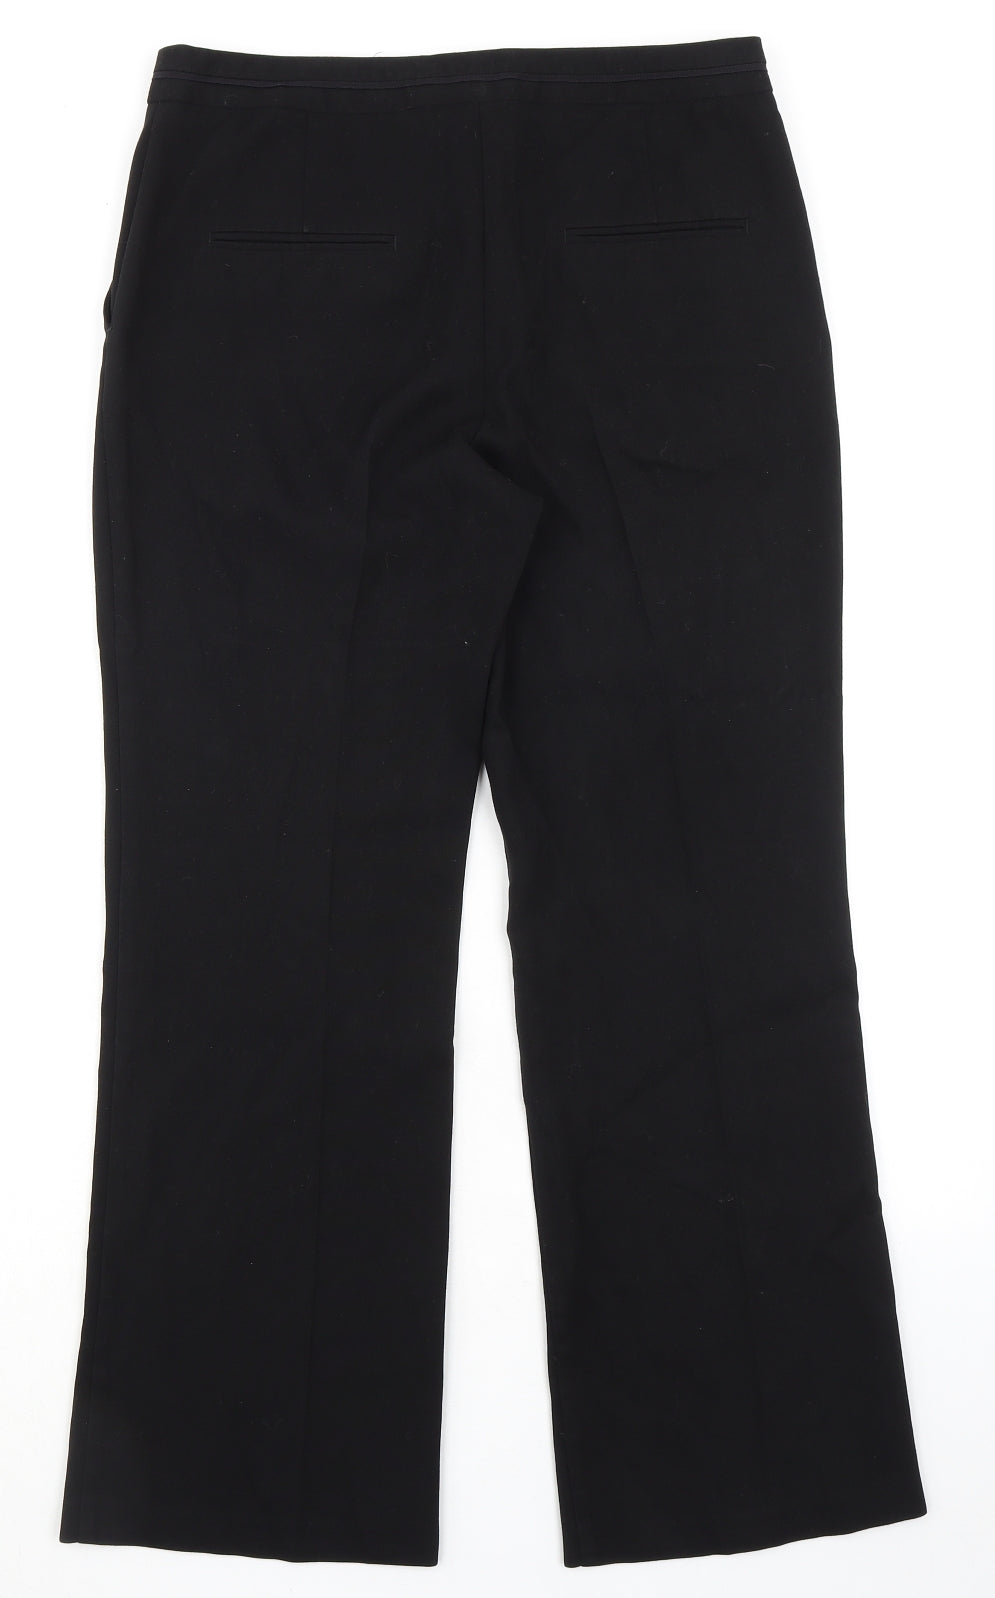 NEXT Womens Black Polyester Dress Pants Trousers Size 12 L28 in Regular Zip